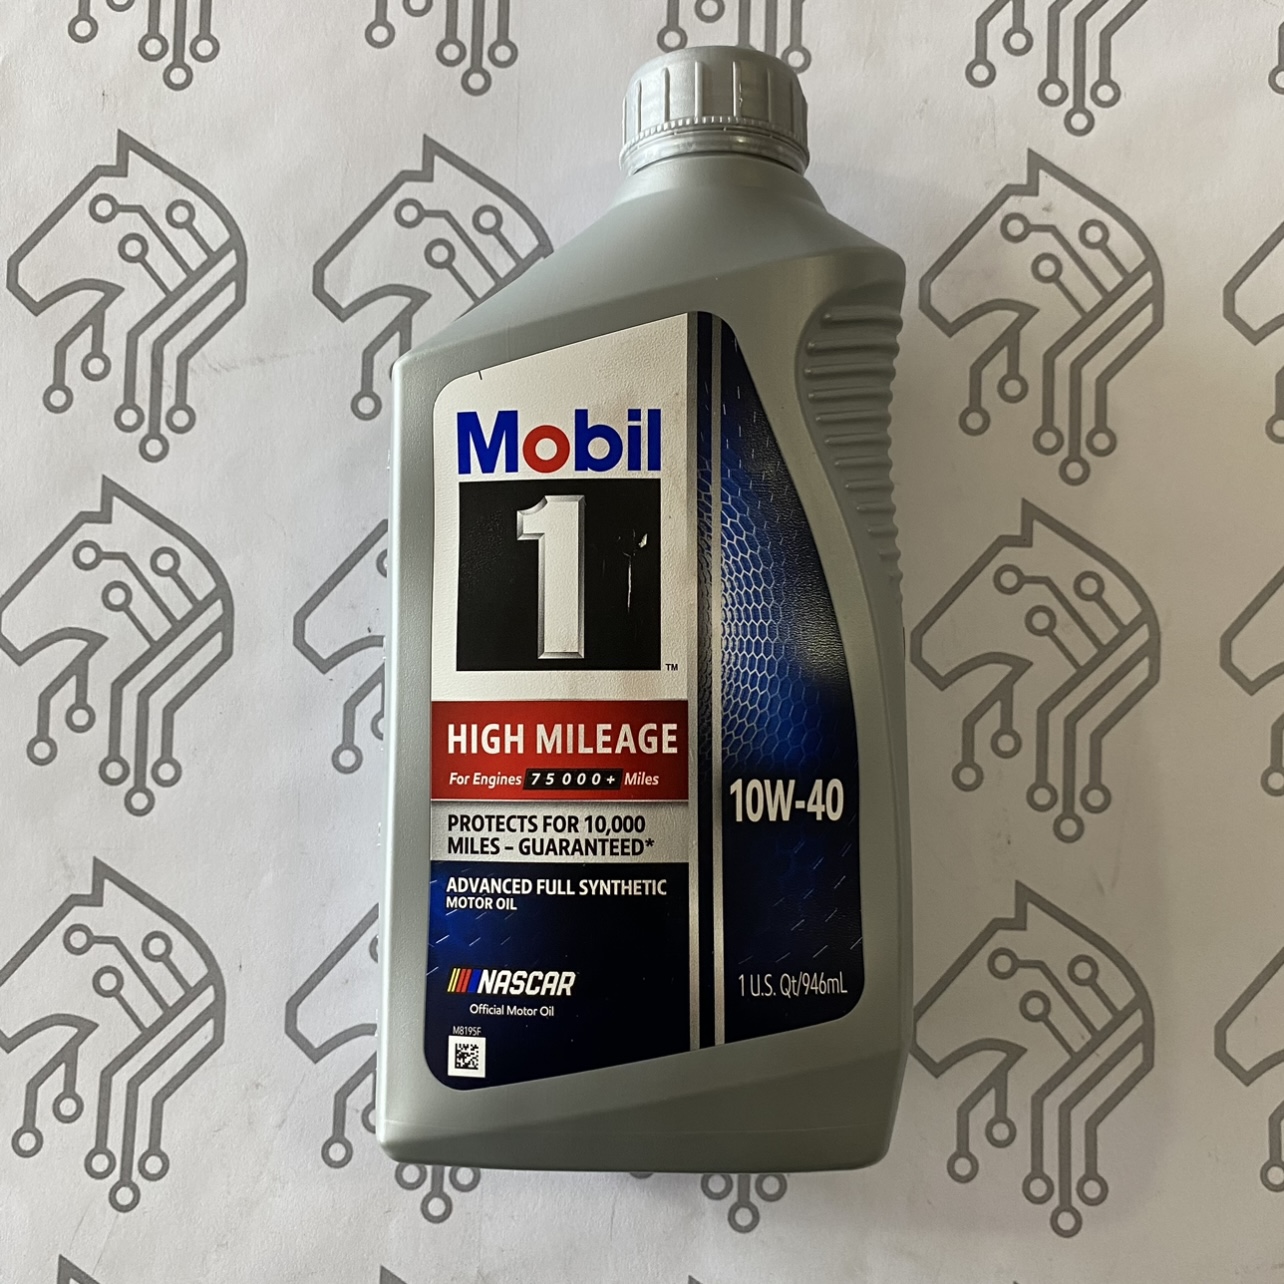 ACEITE MOTOR MOBIL 1 10W-40 